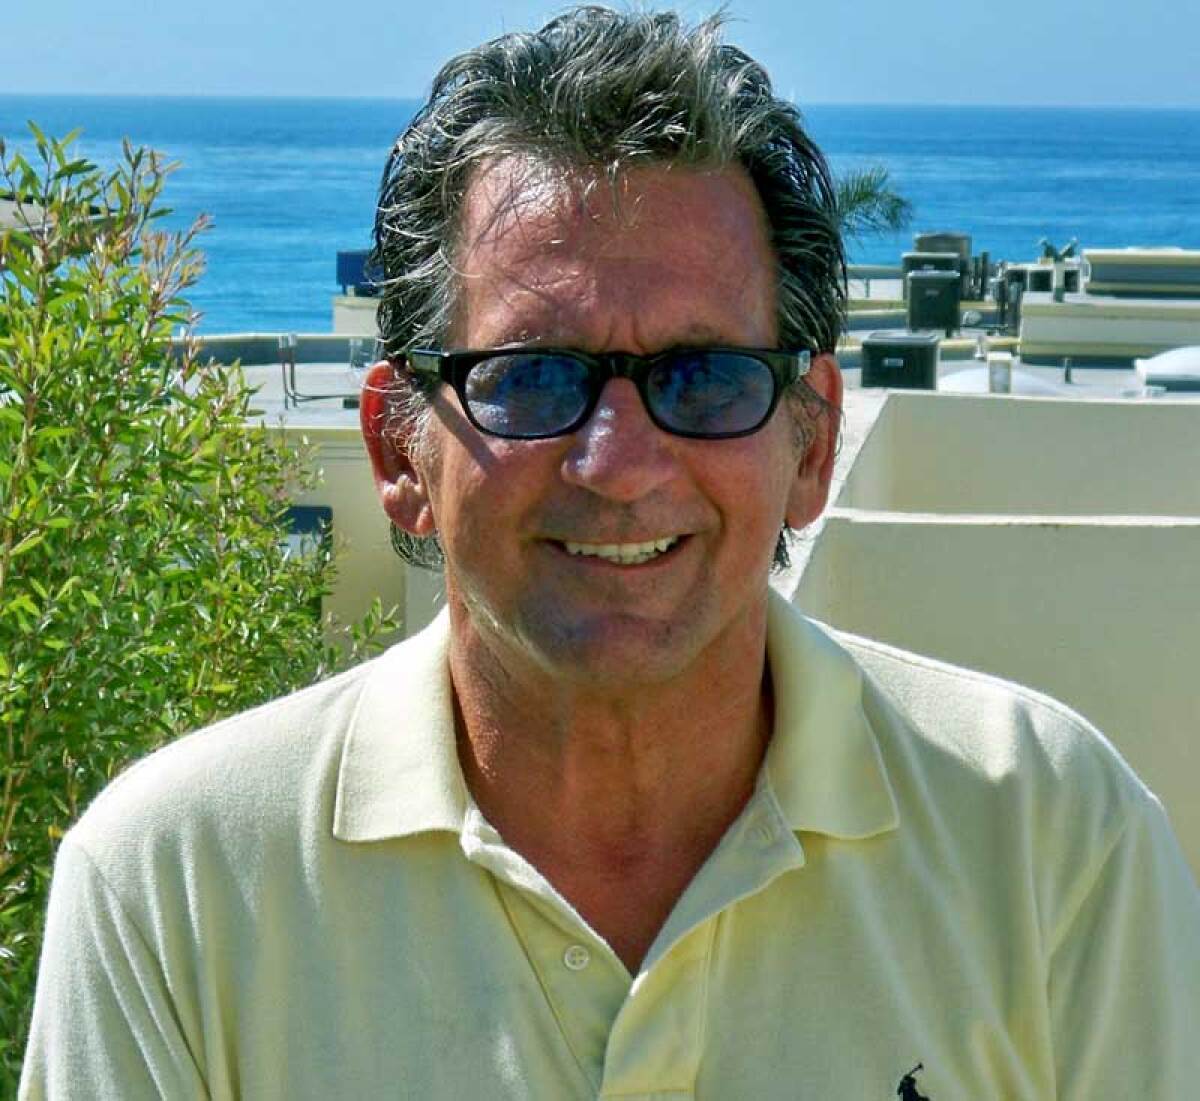 Rod Luck, who worked at KUSI-TV from 1991 to 2008, died Feb. 27.